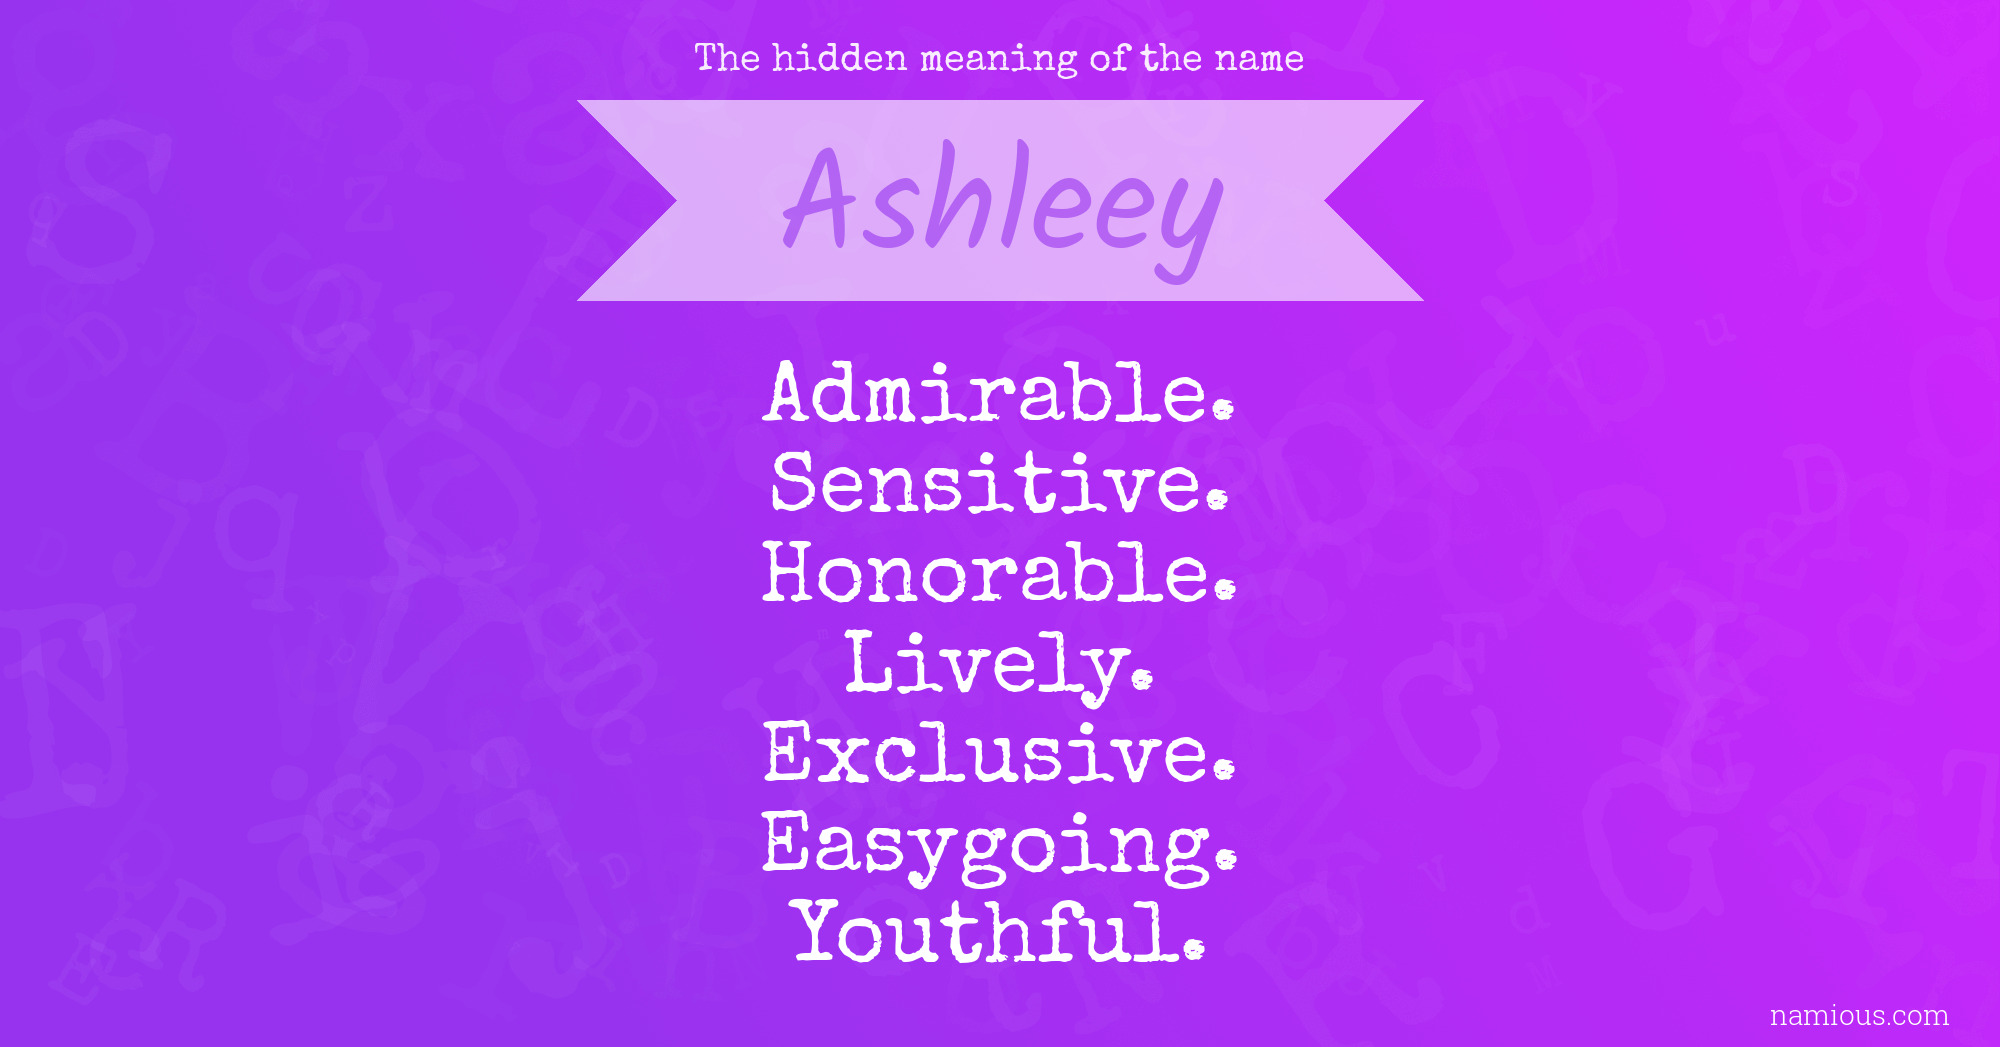 The hidden meaning of the name Ashleey